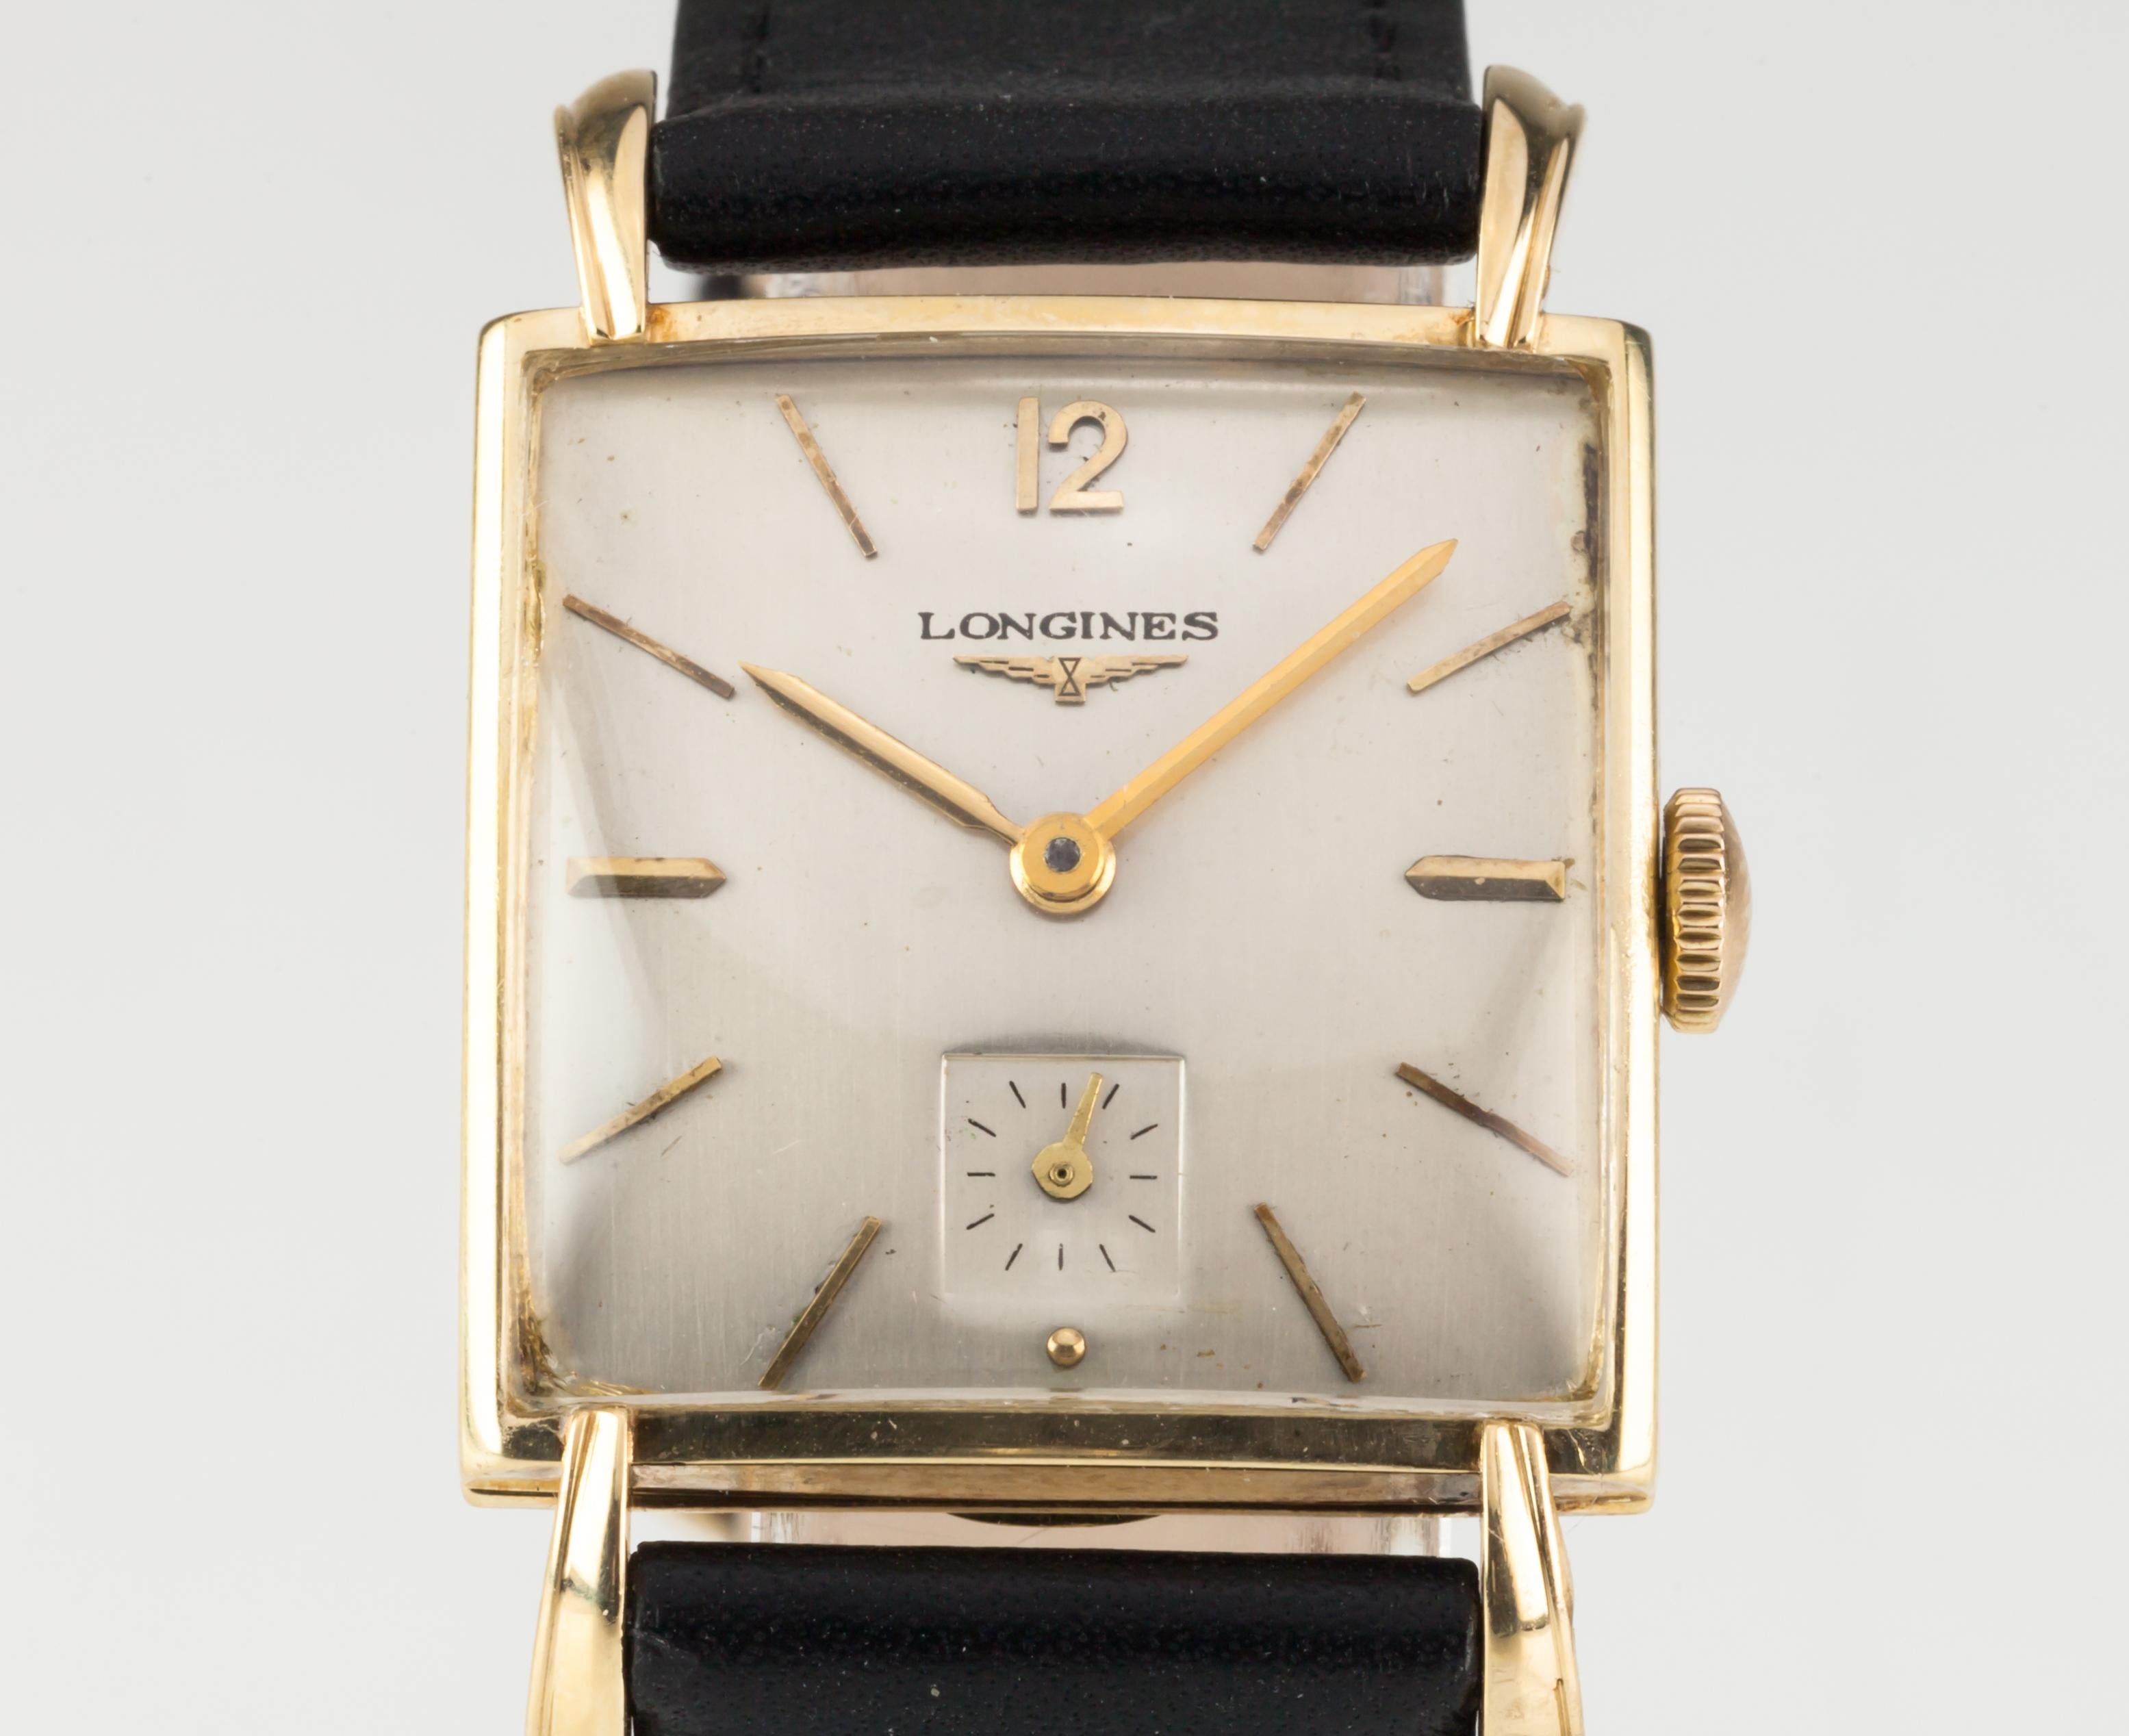 Longines 14k Yellow Gold Men's Square Mechanical Watch 22L 1960s w/ Leather Band

Movement #22L
Movement Serial #9410749
Case #160
Case Serial #5990

14k Yellow Gold Square Case
25 mm Wide (27 mm w/ Crown)
26 mm Long
Lug-to-Lug Distance = 39